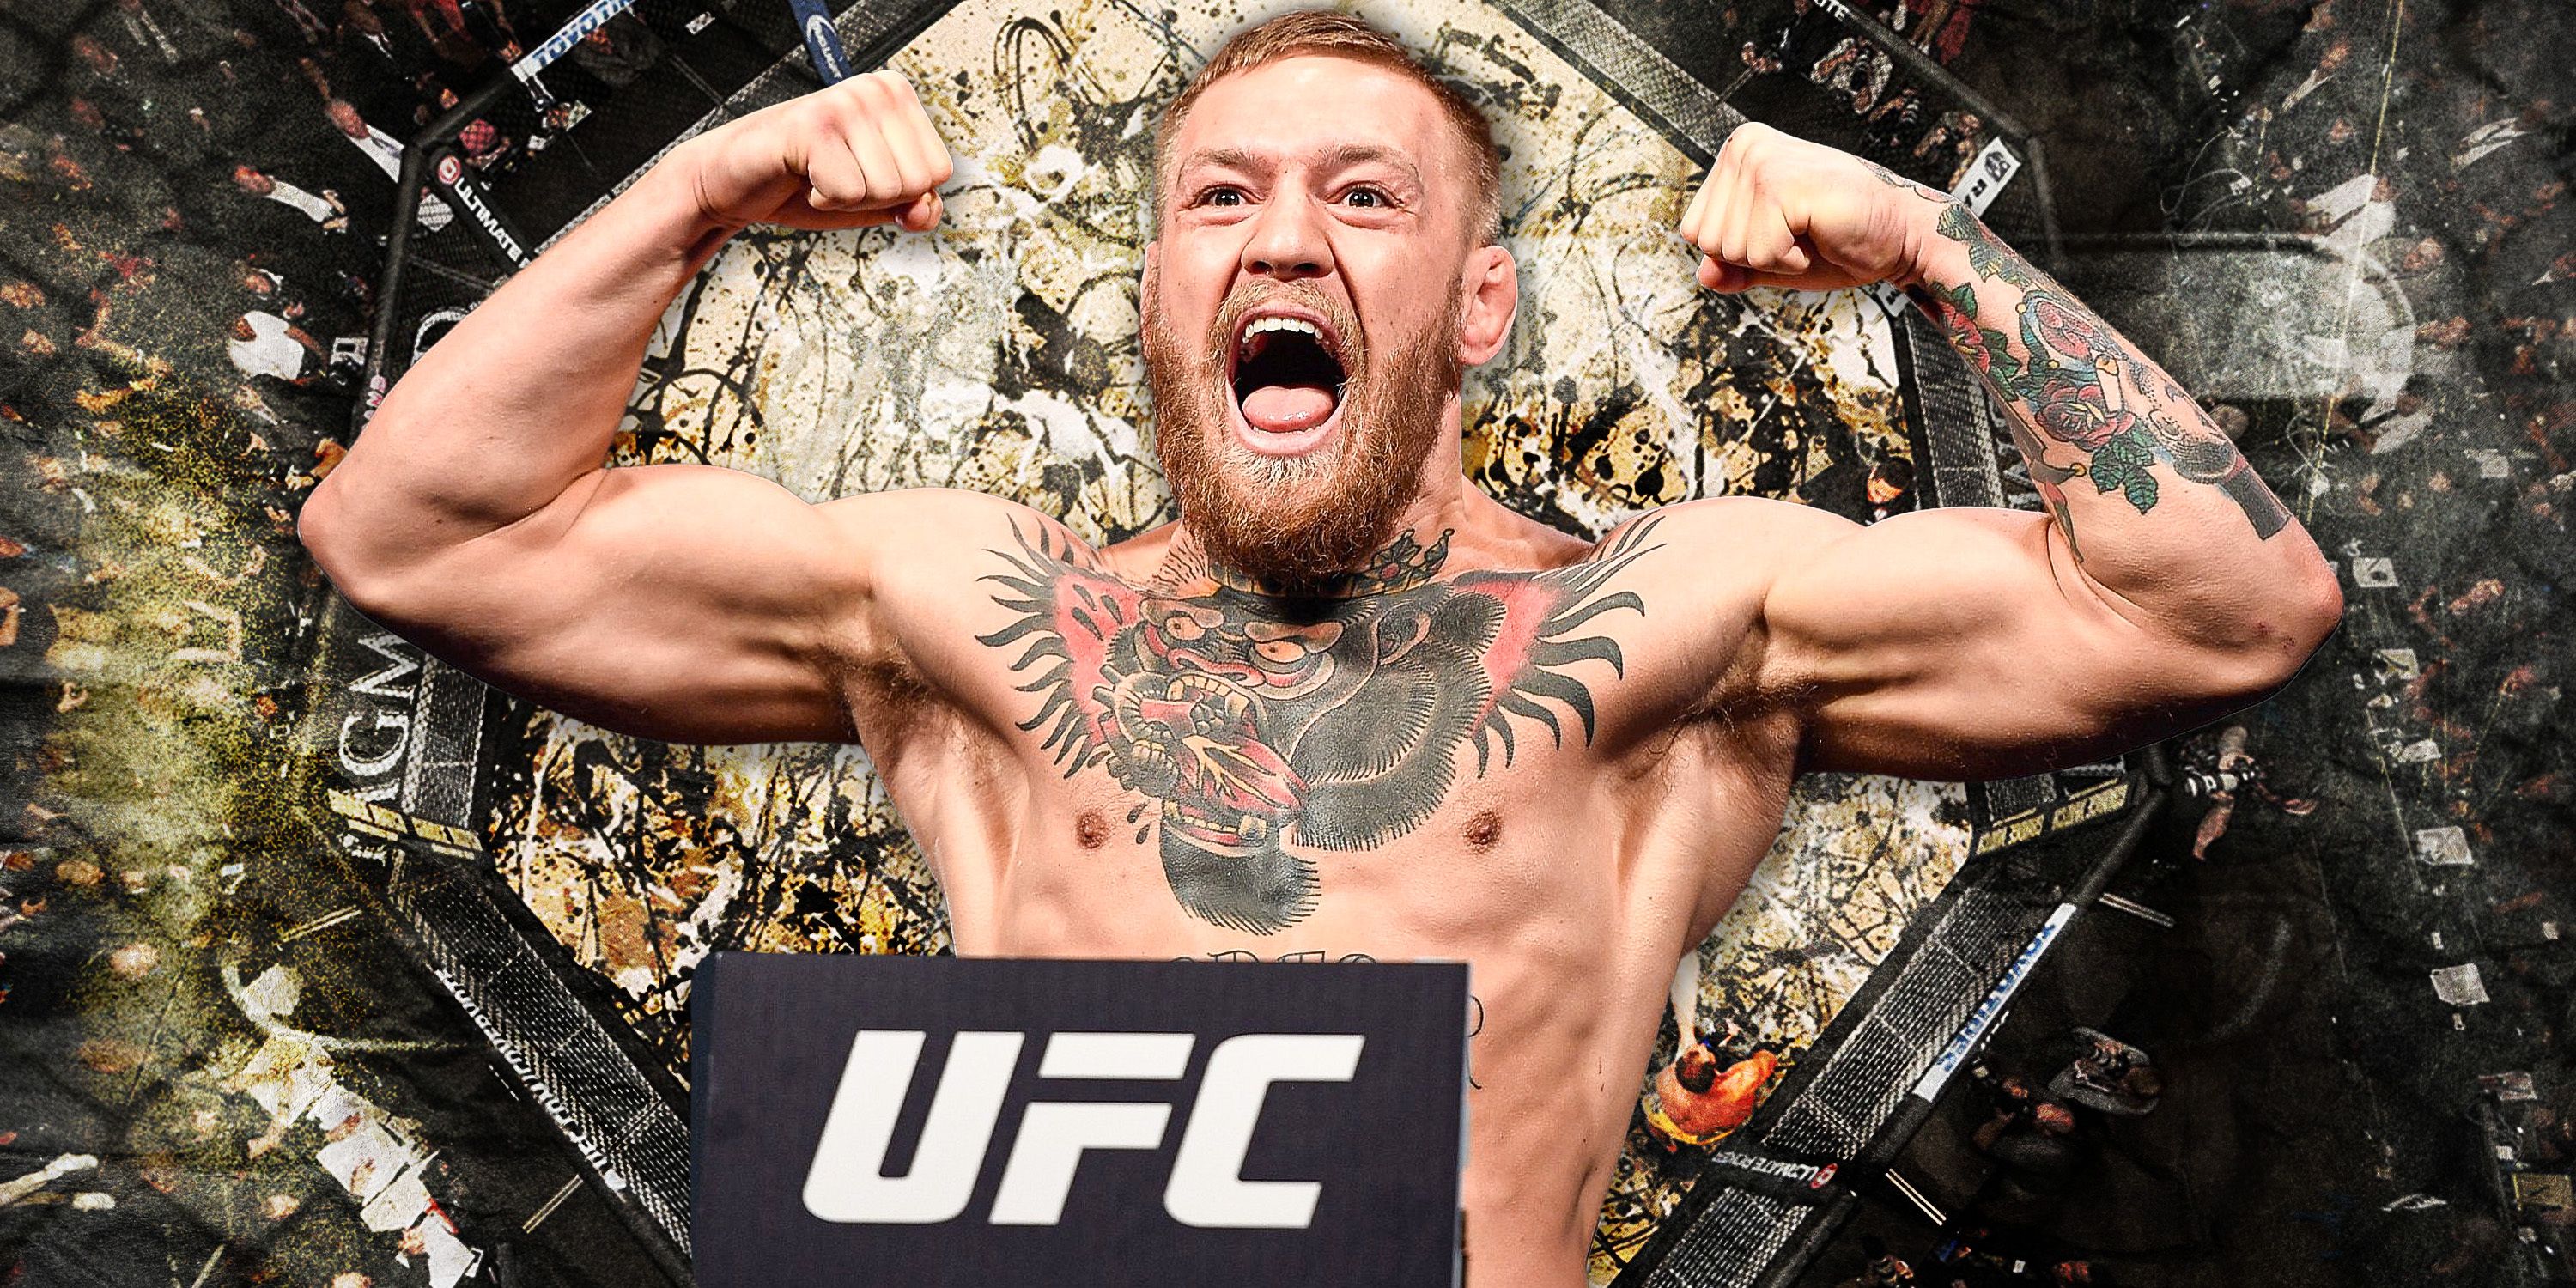 conor mcgregor's ufc record at welterweight